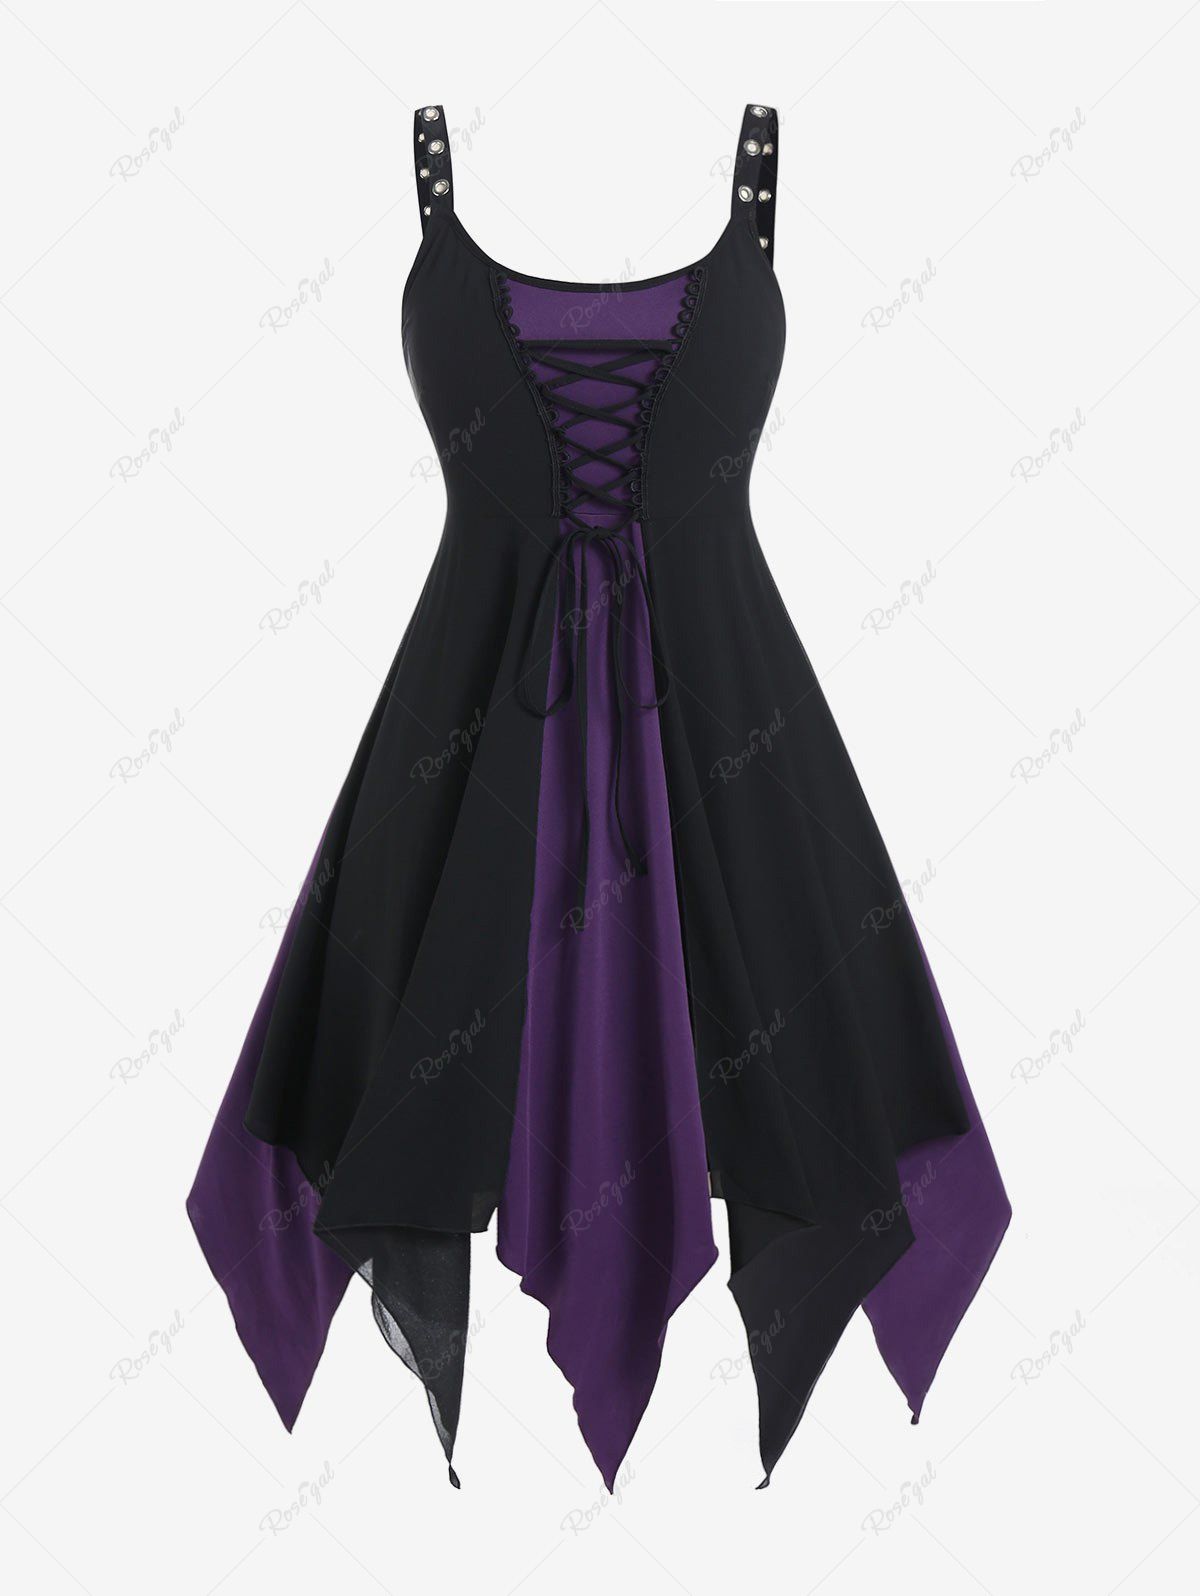 Cheap Plus Size Gothic Lace Up Grommet Backless Sleeveless Handkerchief Midi Dress  